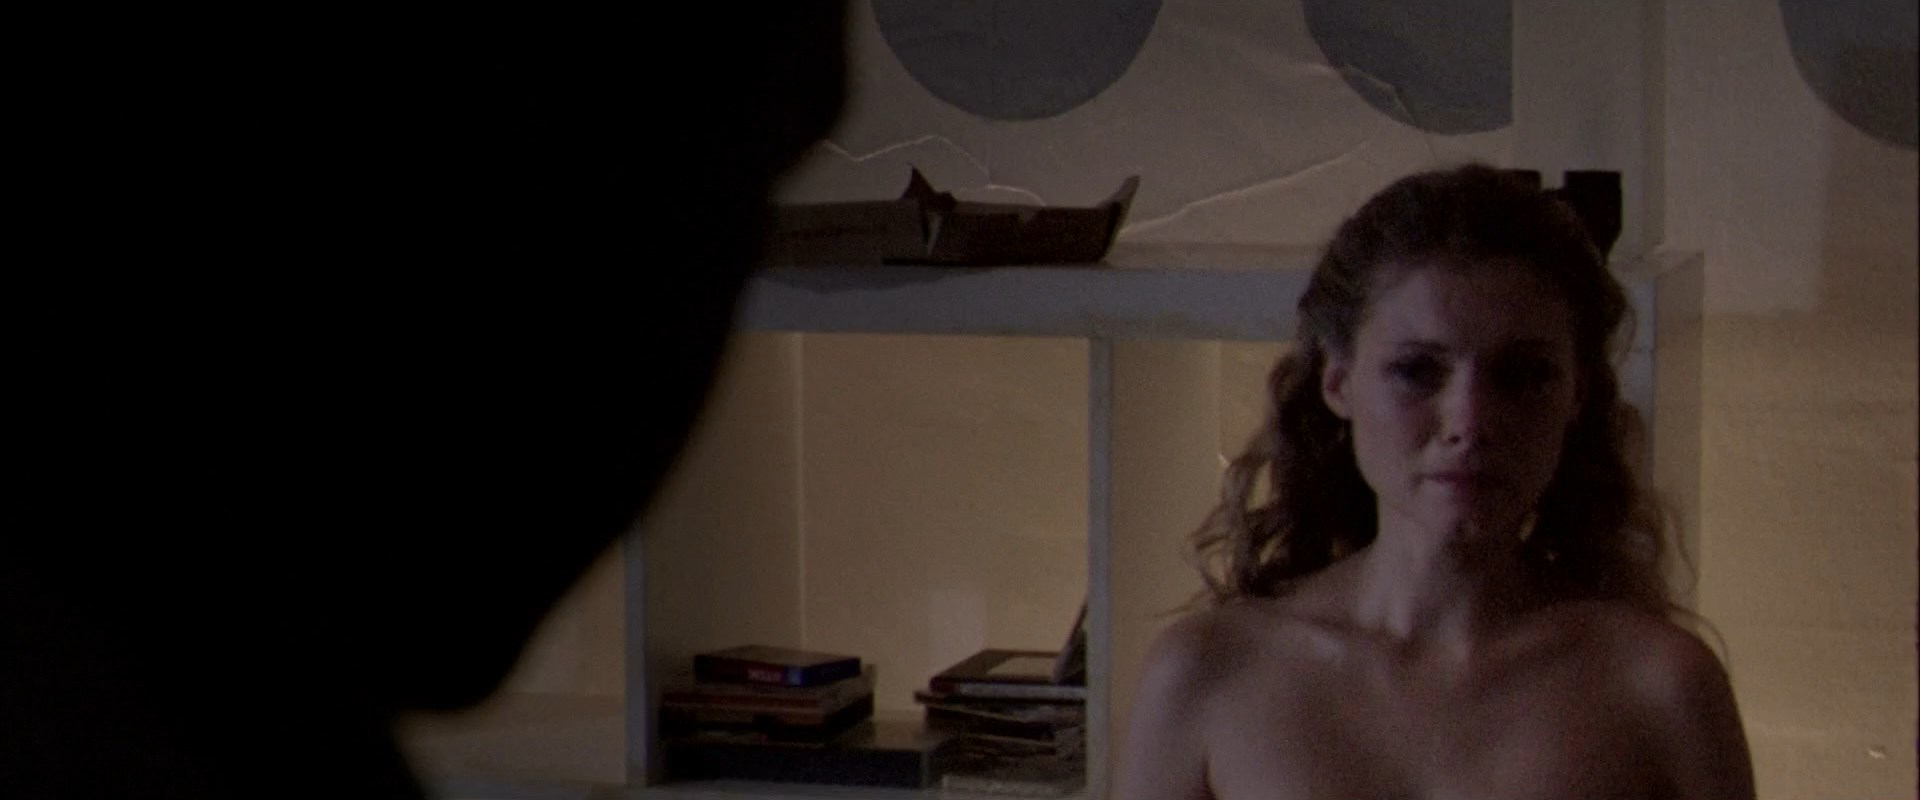 MyAnna Buring walks in the room naked. 